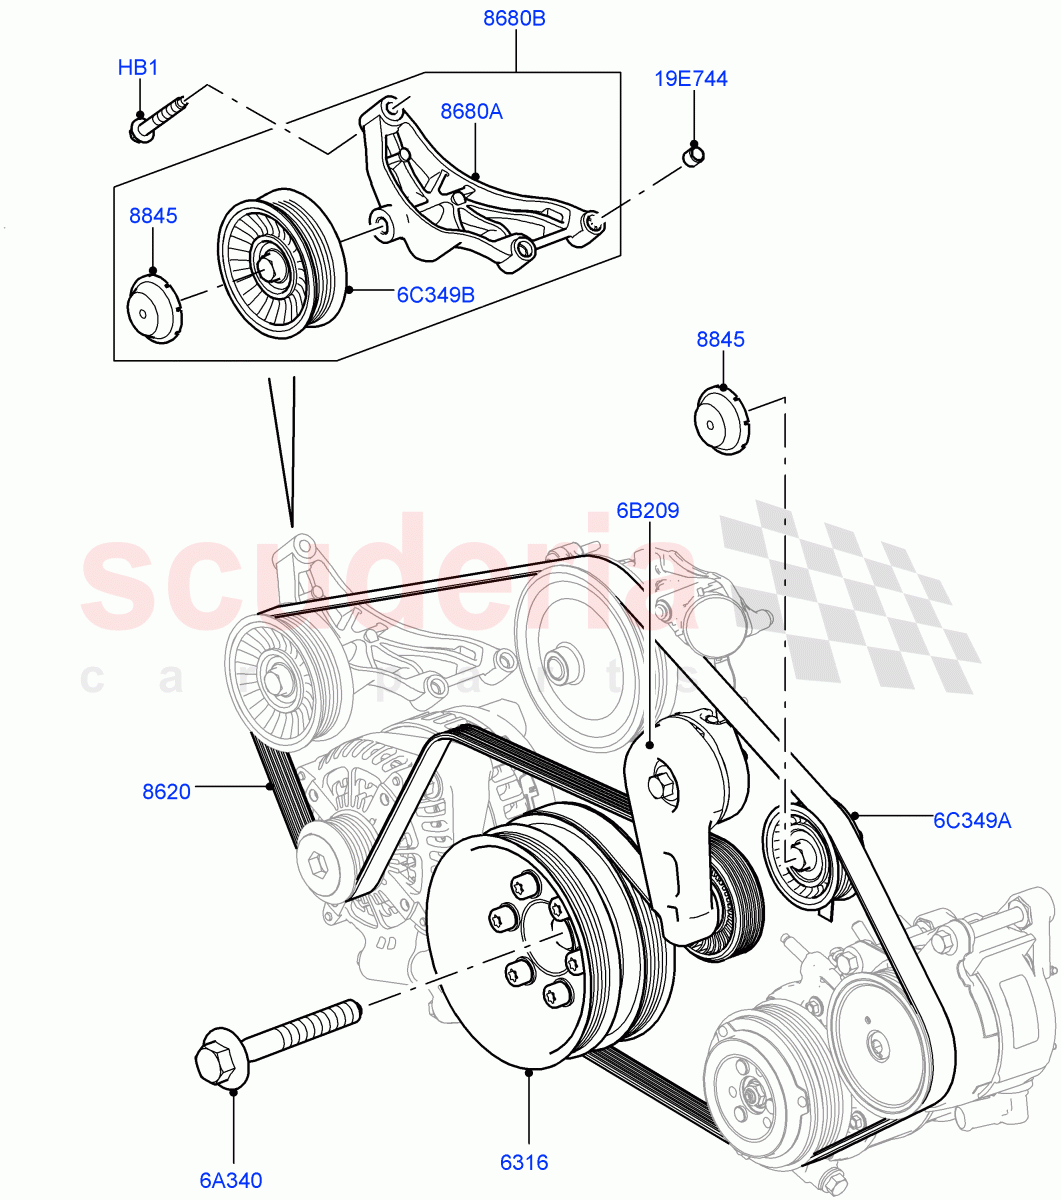 Pulleys And Drive Belts(Primary Drive)(5.0L OHC SGDI SC V8 Petrol - AJ133)((V)TOHA999999) of Land Rover Land Rover Range Rover Sport (2014+) [5.0 OHC SGDI SC V8 Petrol]